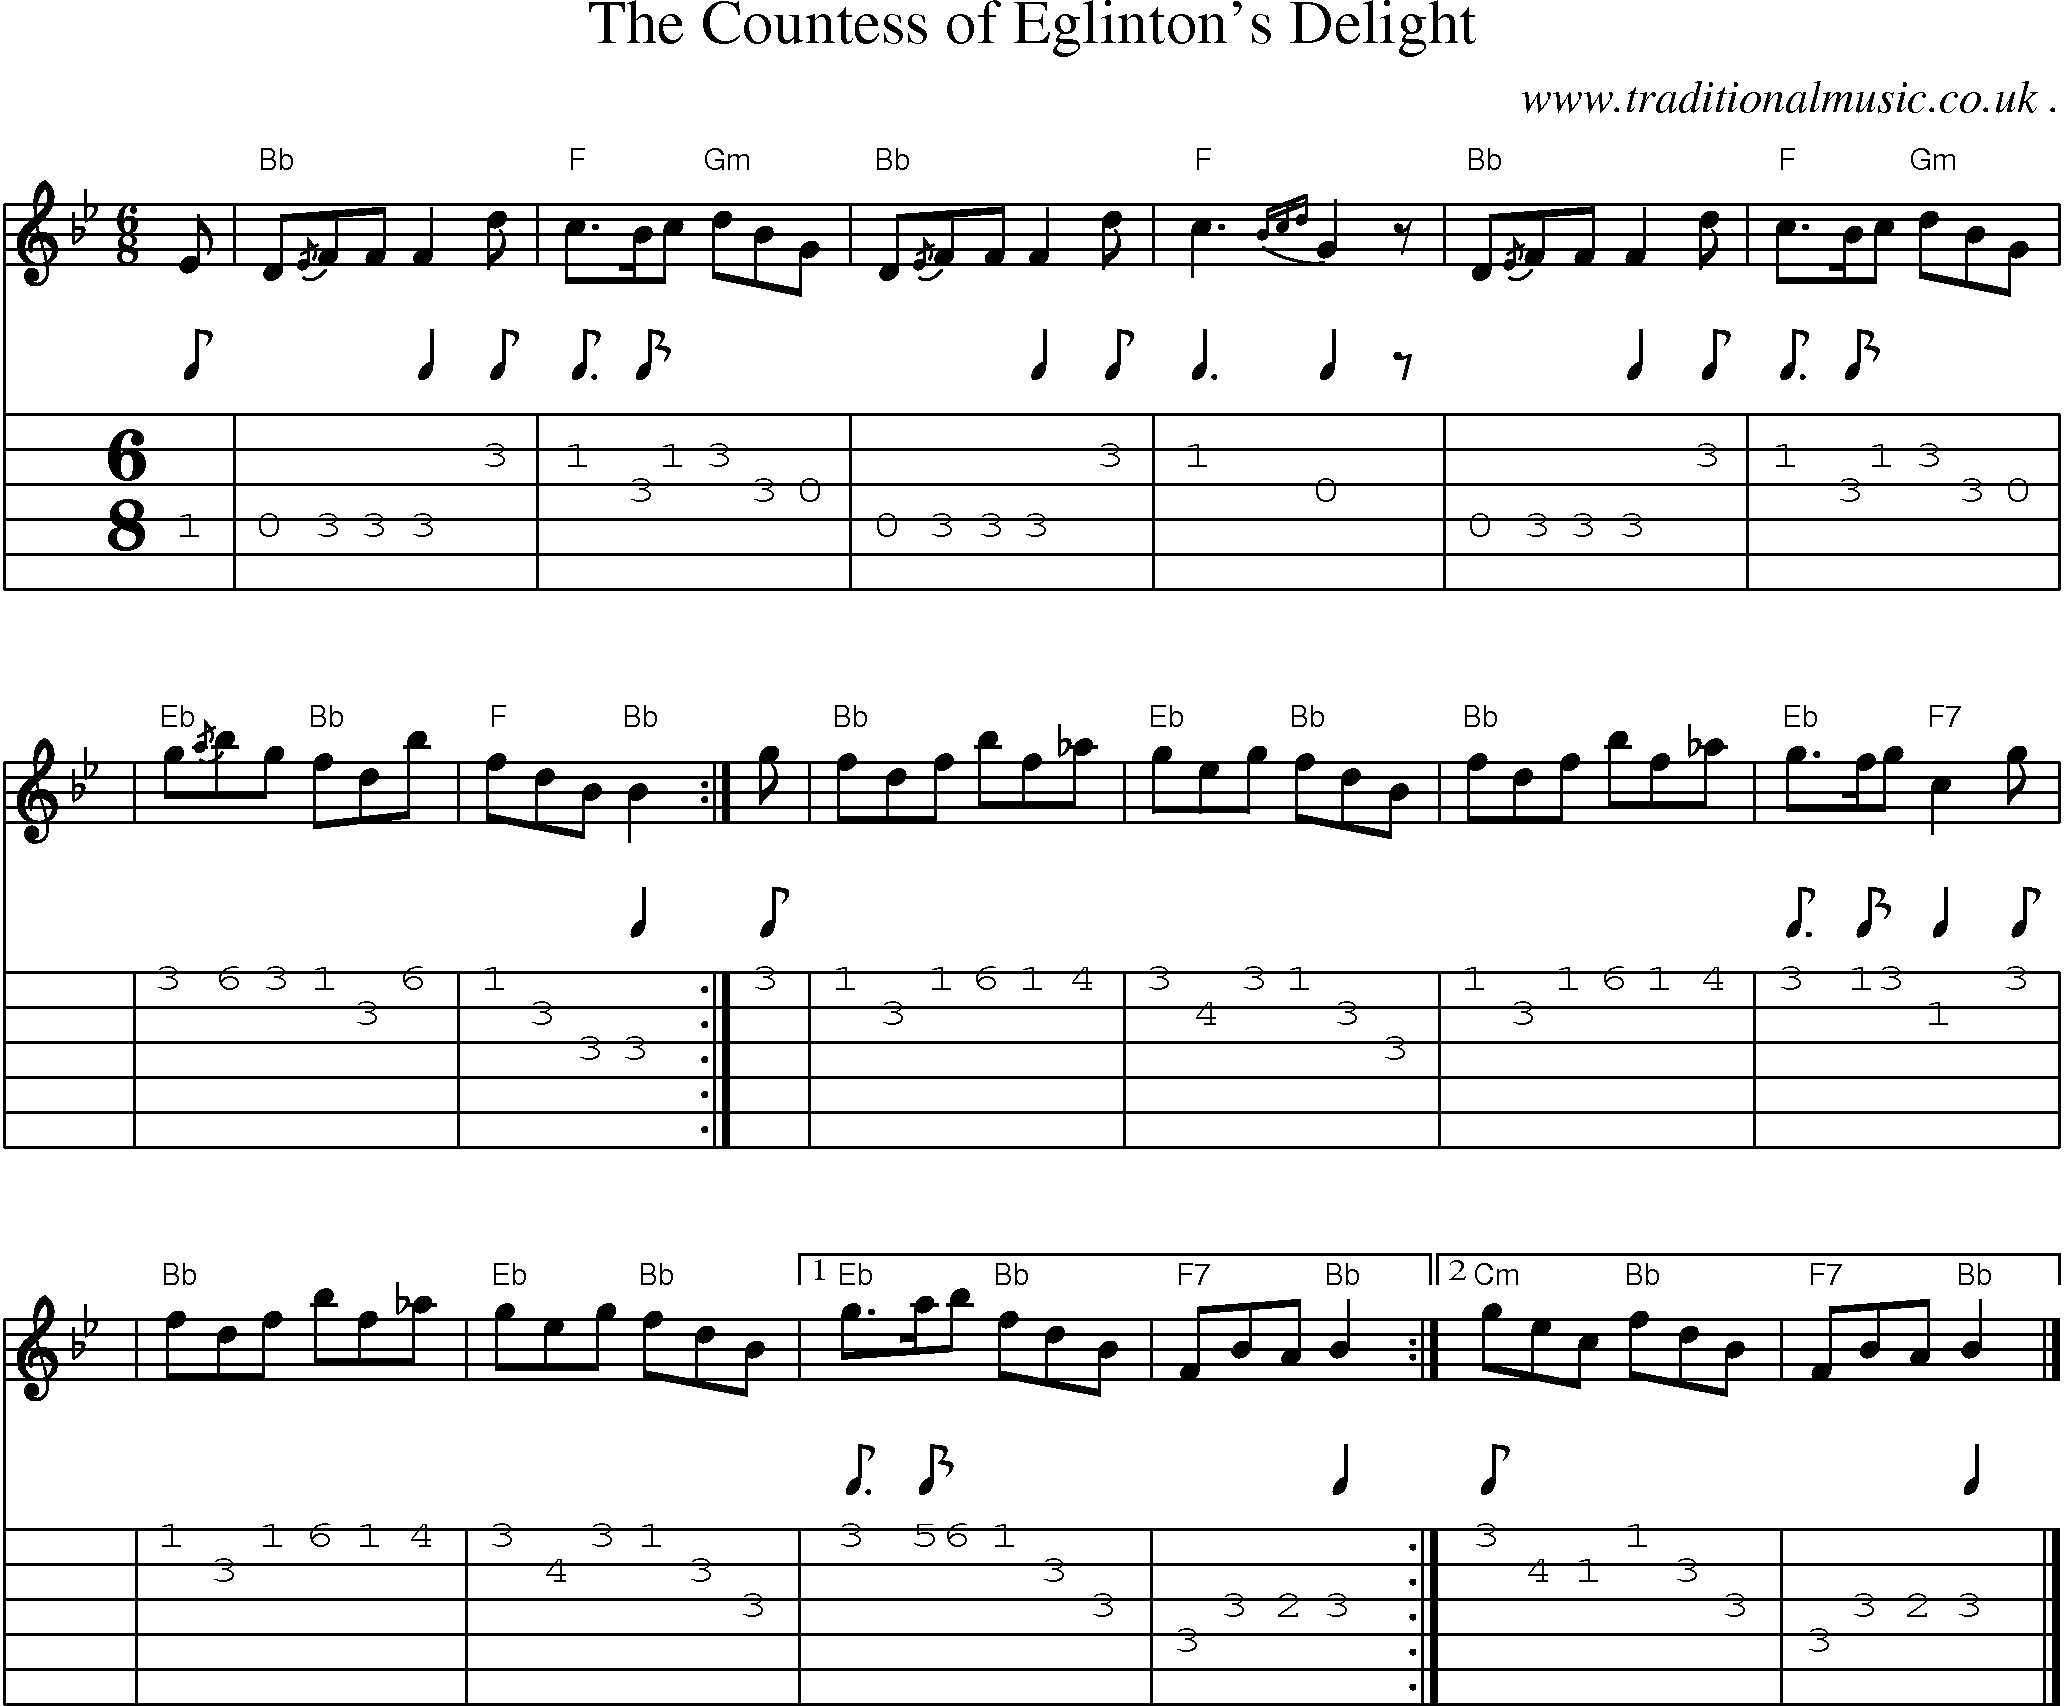 Sheet-music  score, Chords and Guitar Tabs for The Countess Of Eglintons Delight